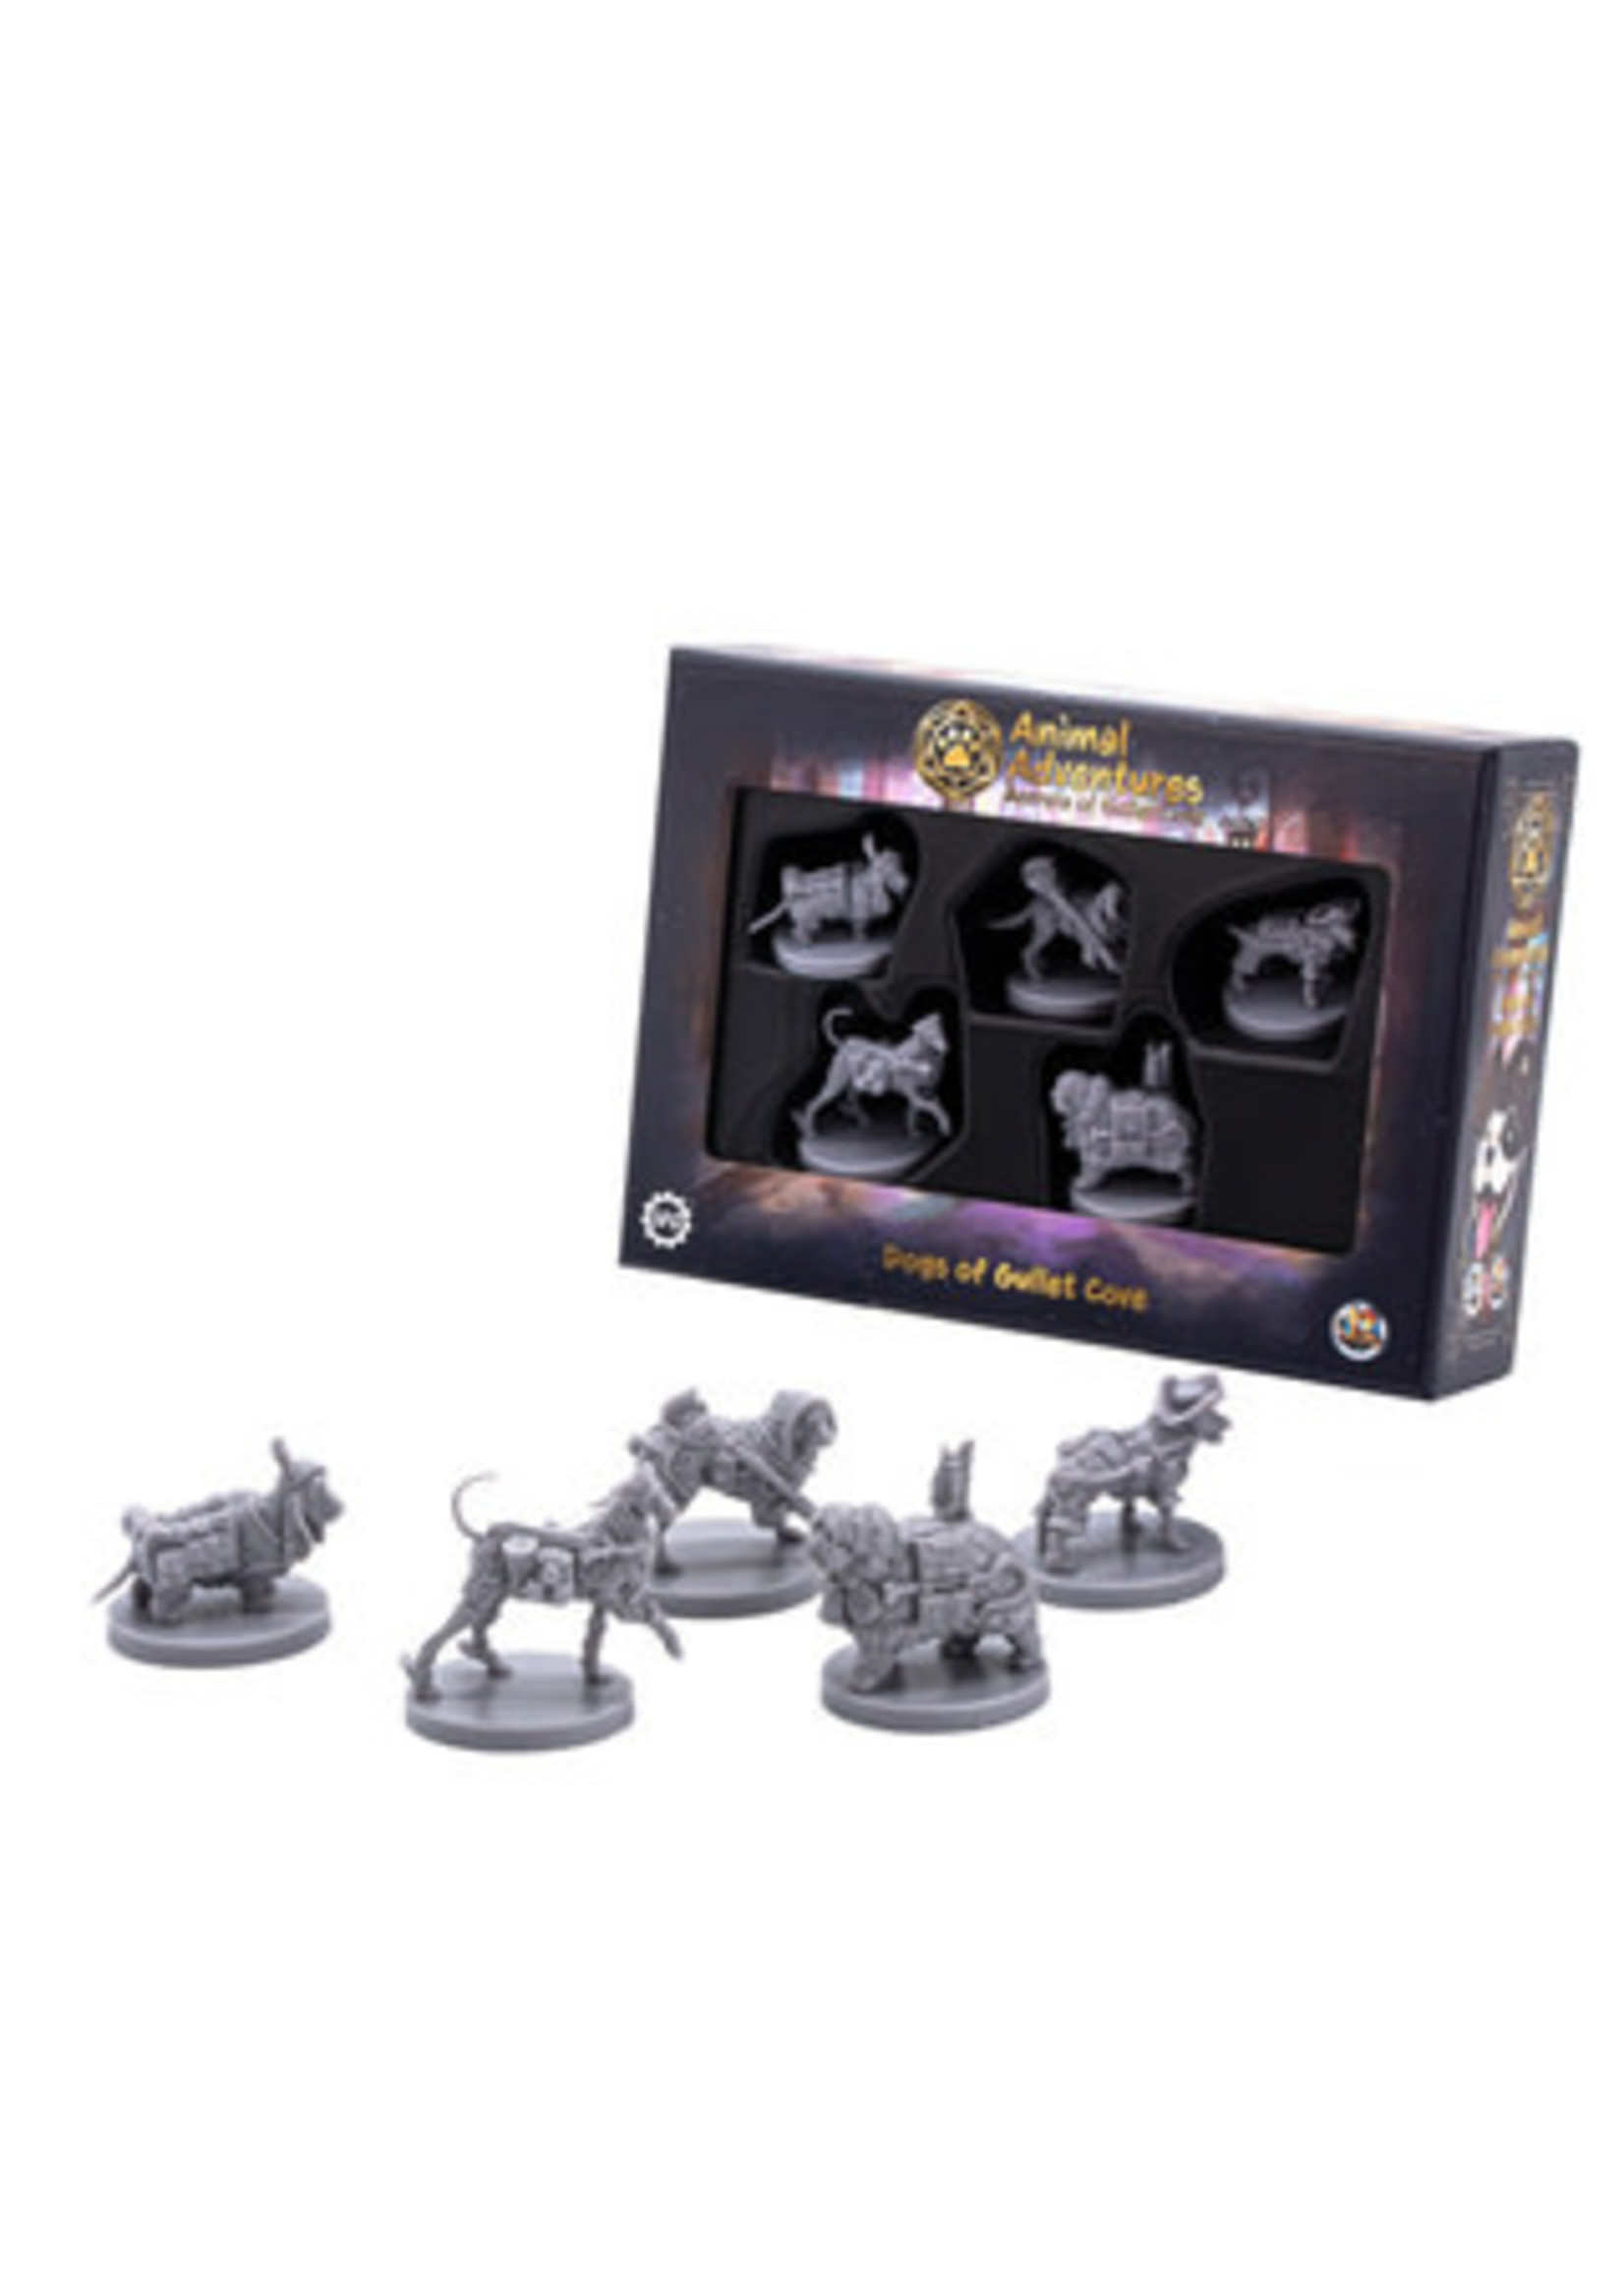 Steamforged Games Animal Adventures: Secrets of Gullet Cove: Dogs